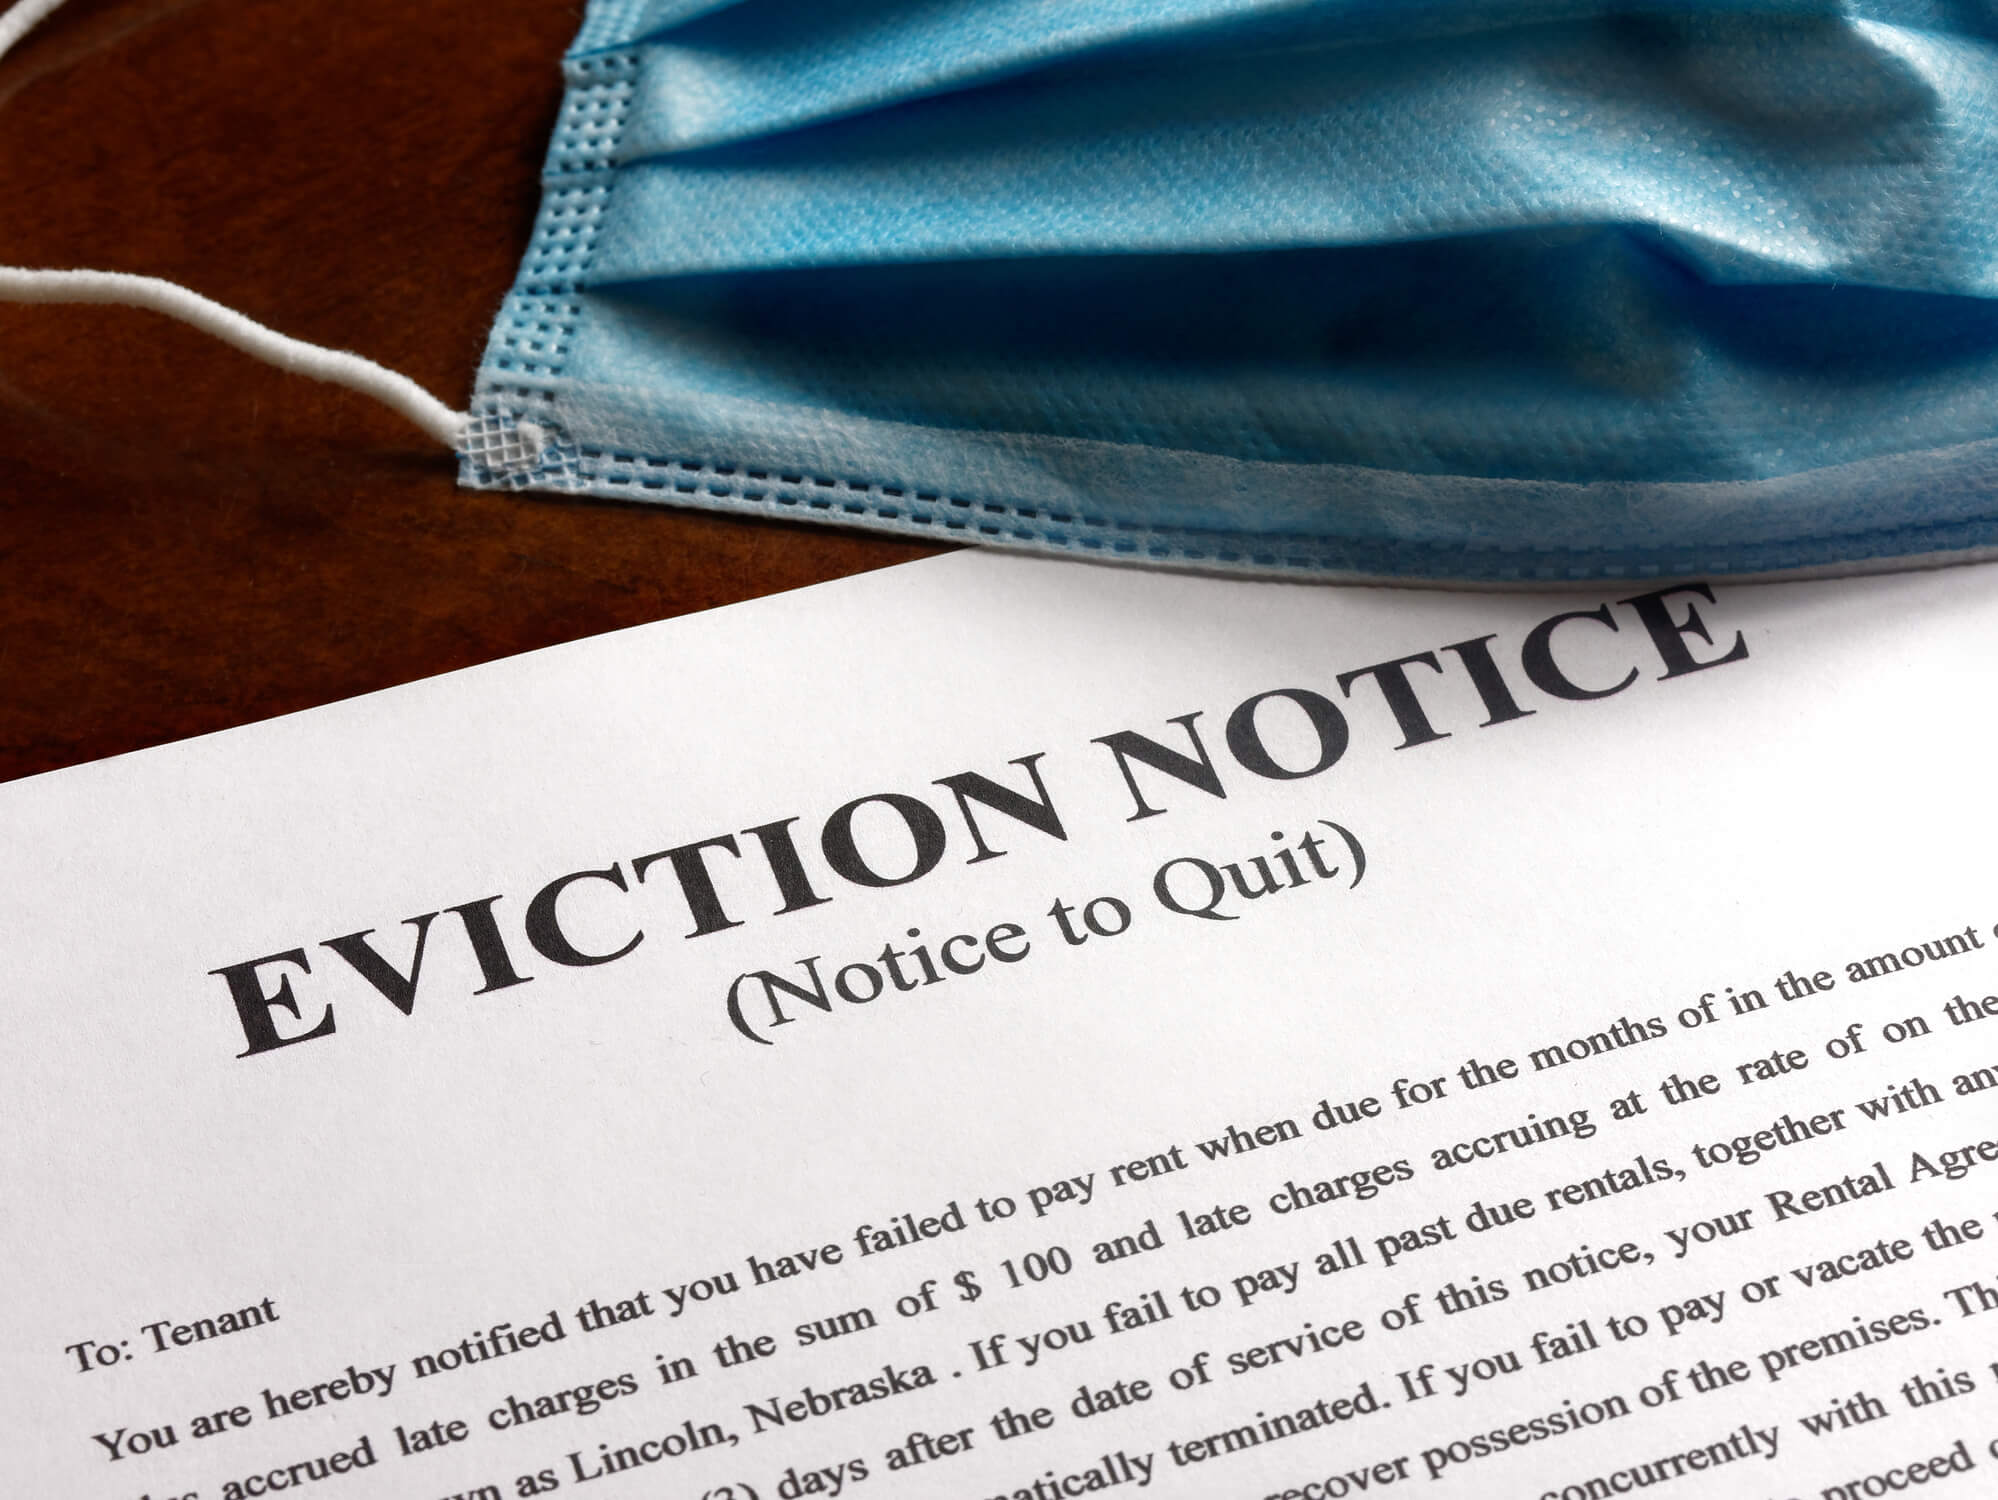 The eviction crisis related to Covid-19 will affect millions of pets